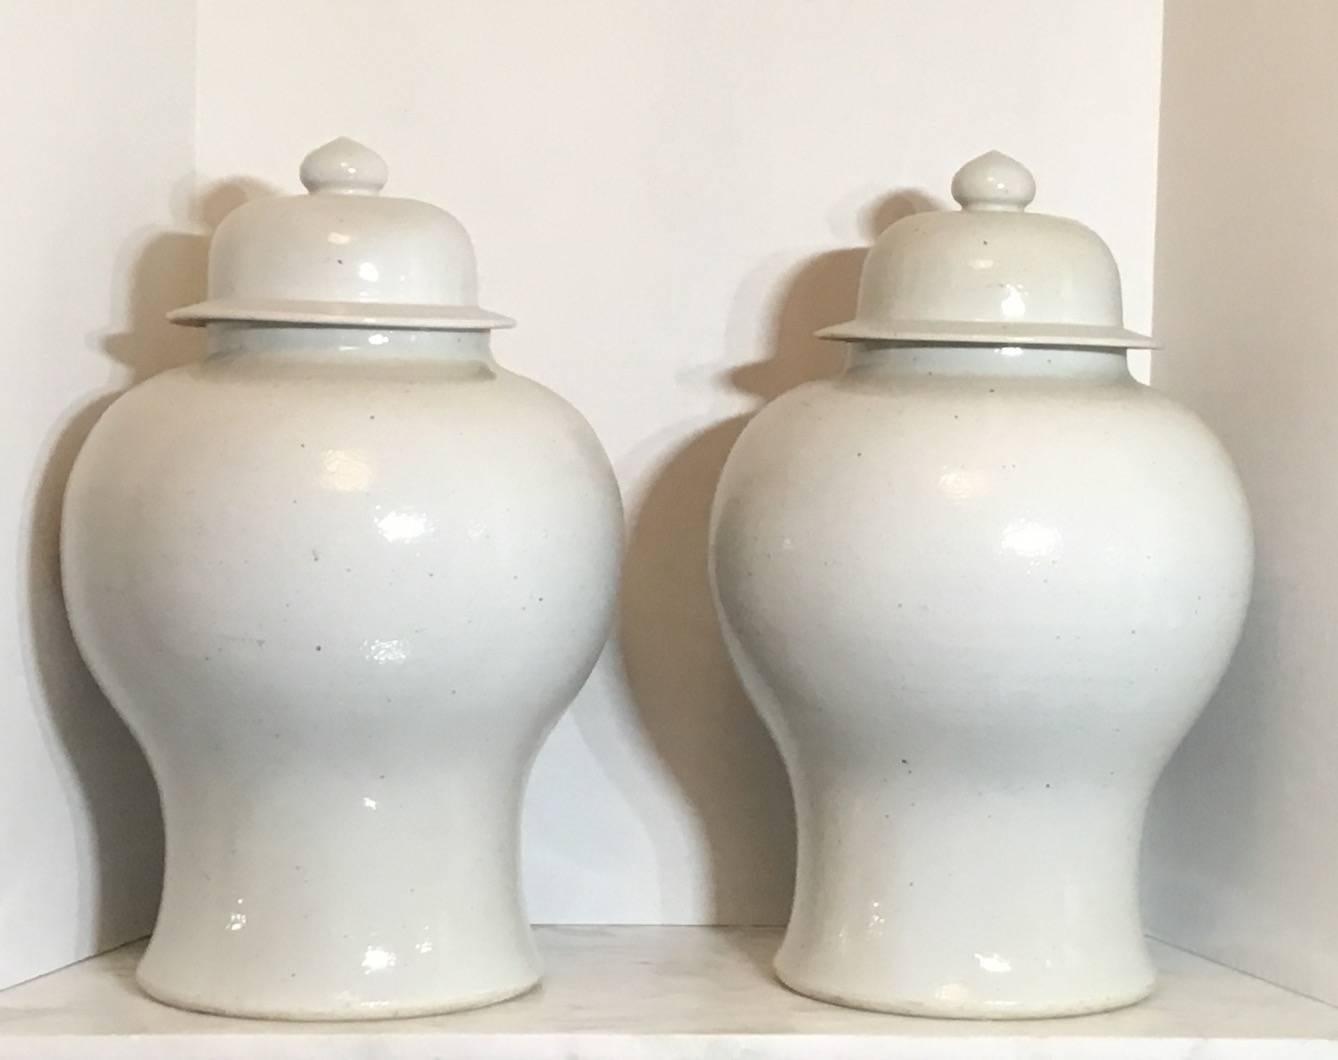 Elagent pair of decorative Chinese ceramic vases in gray-white color separate
Top included . Could decorate with or without top 
Size of opening 5